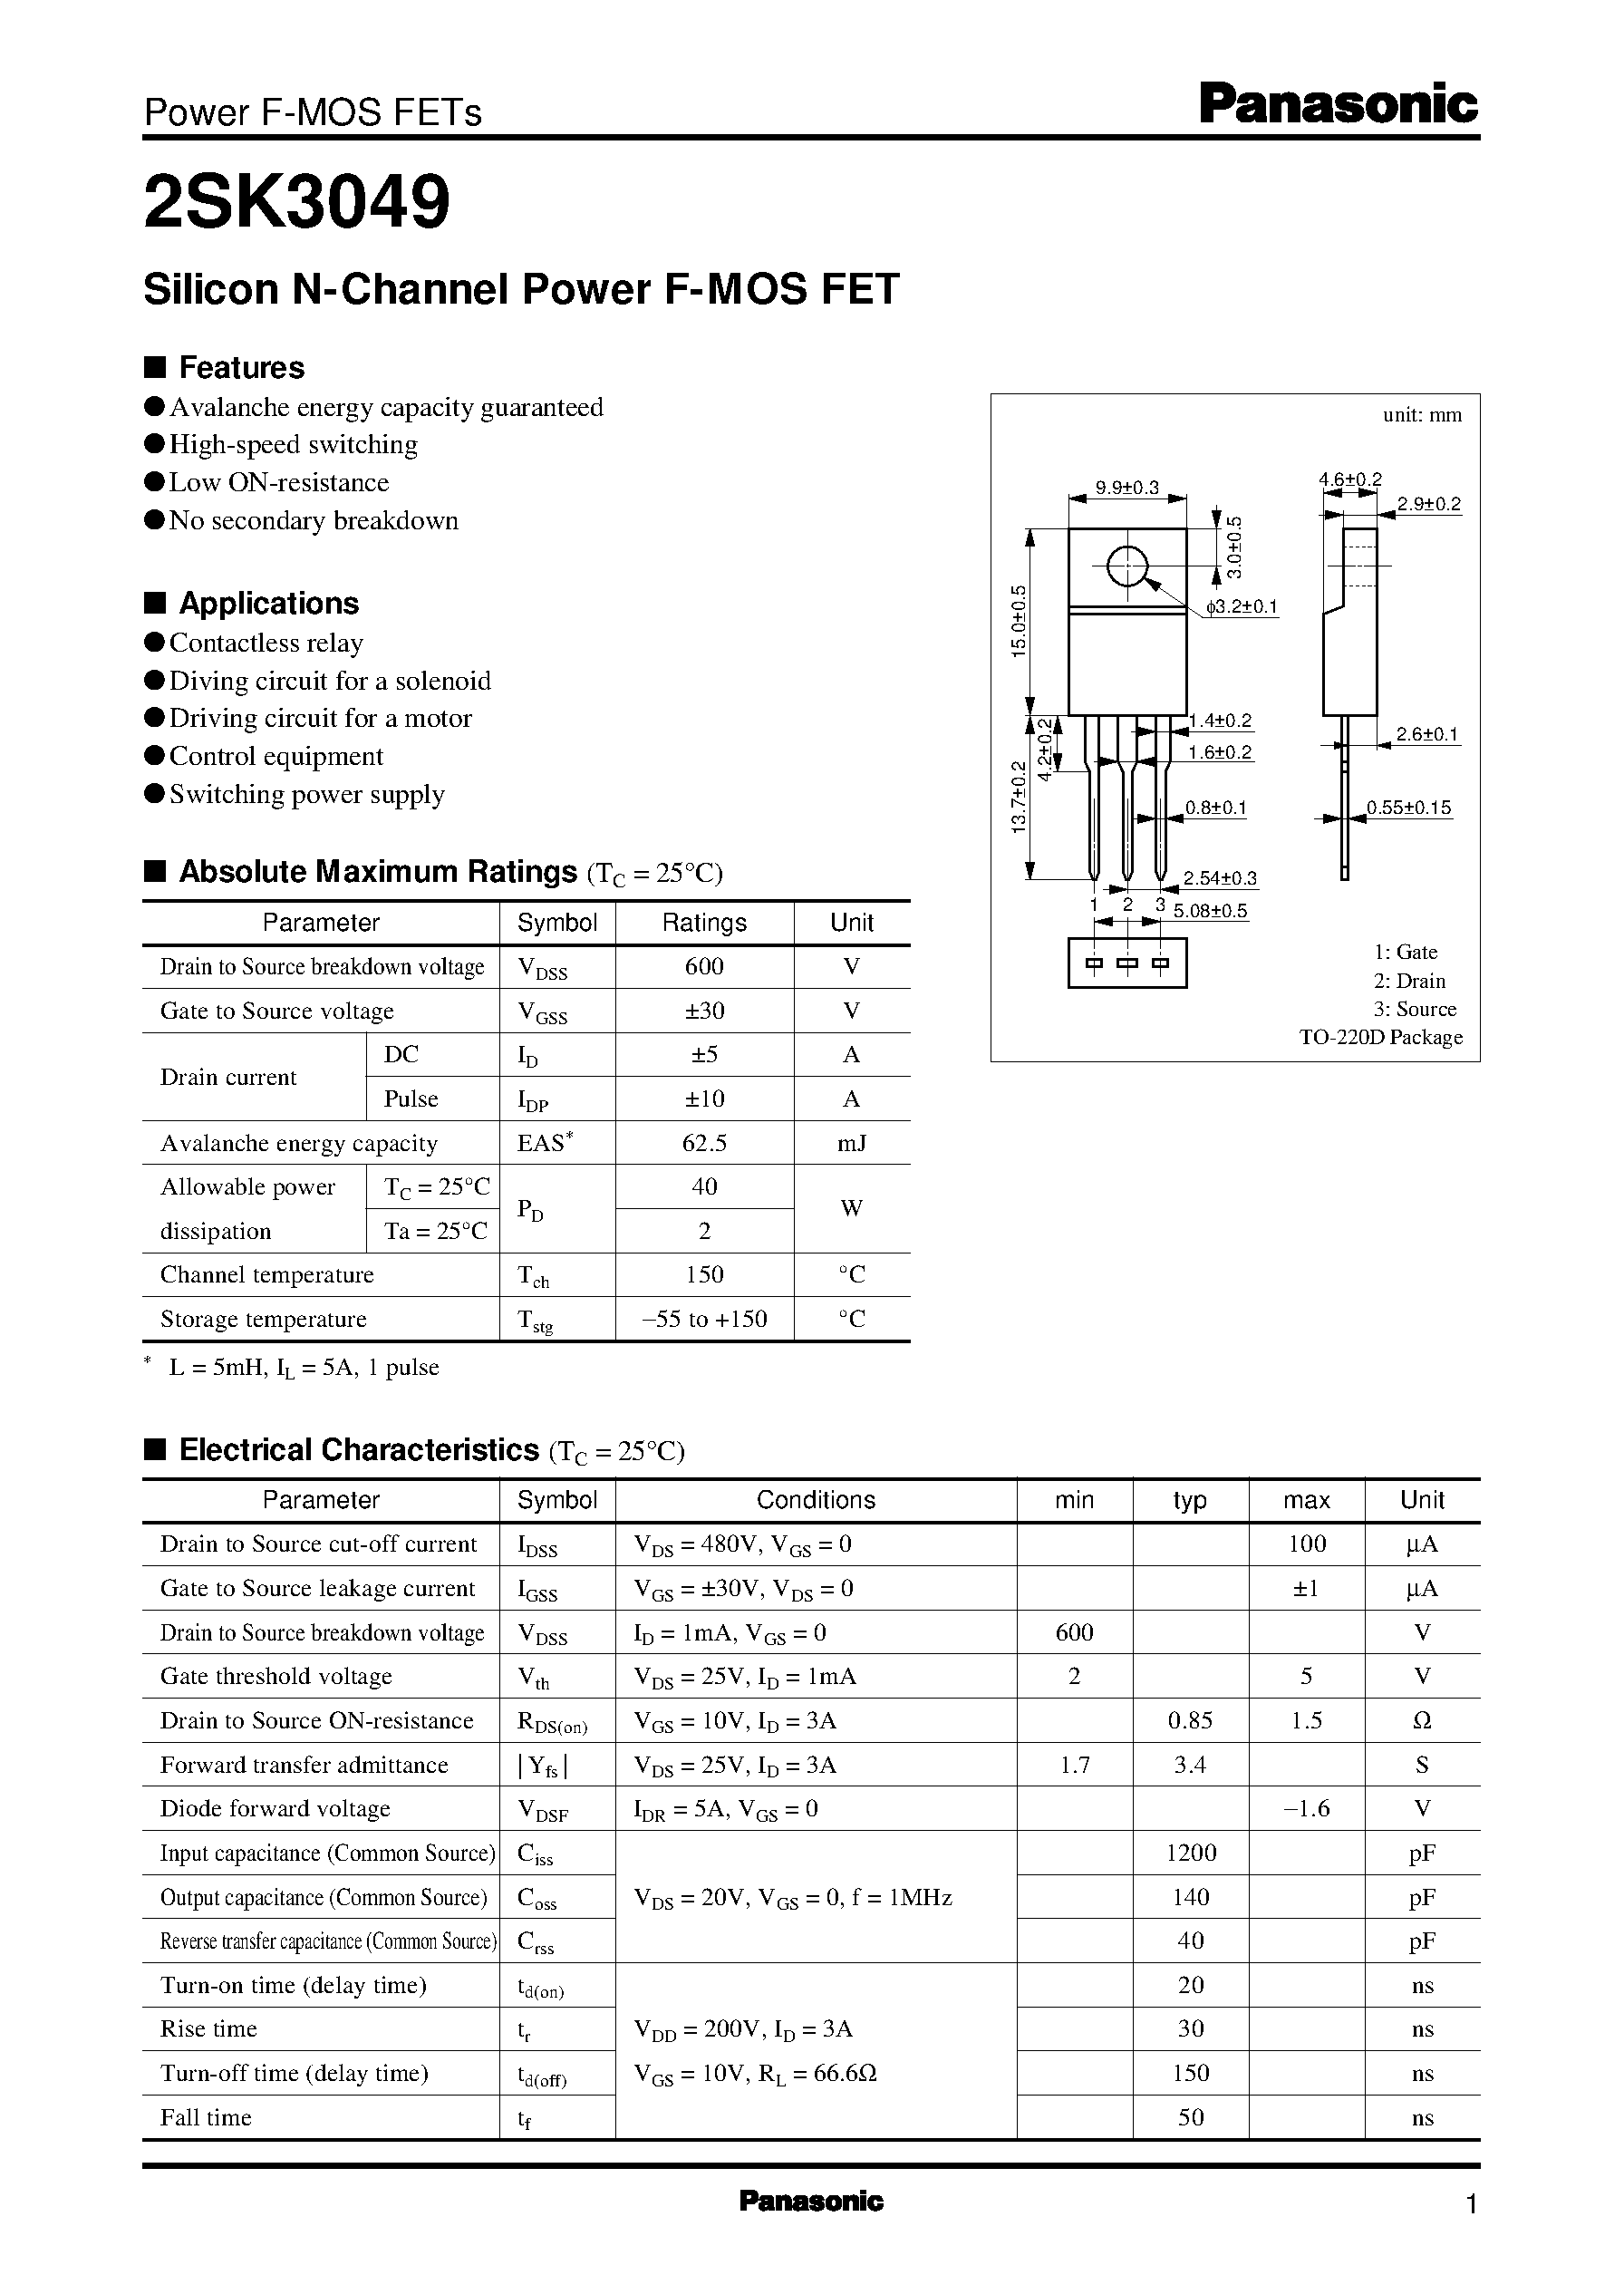 Datasheet 2SK30 - Silicon N-Channel Power F-MOS FET page 1